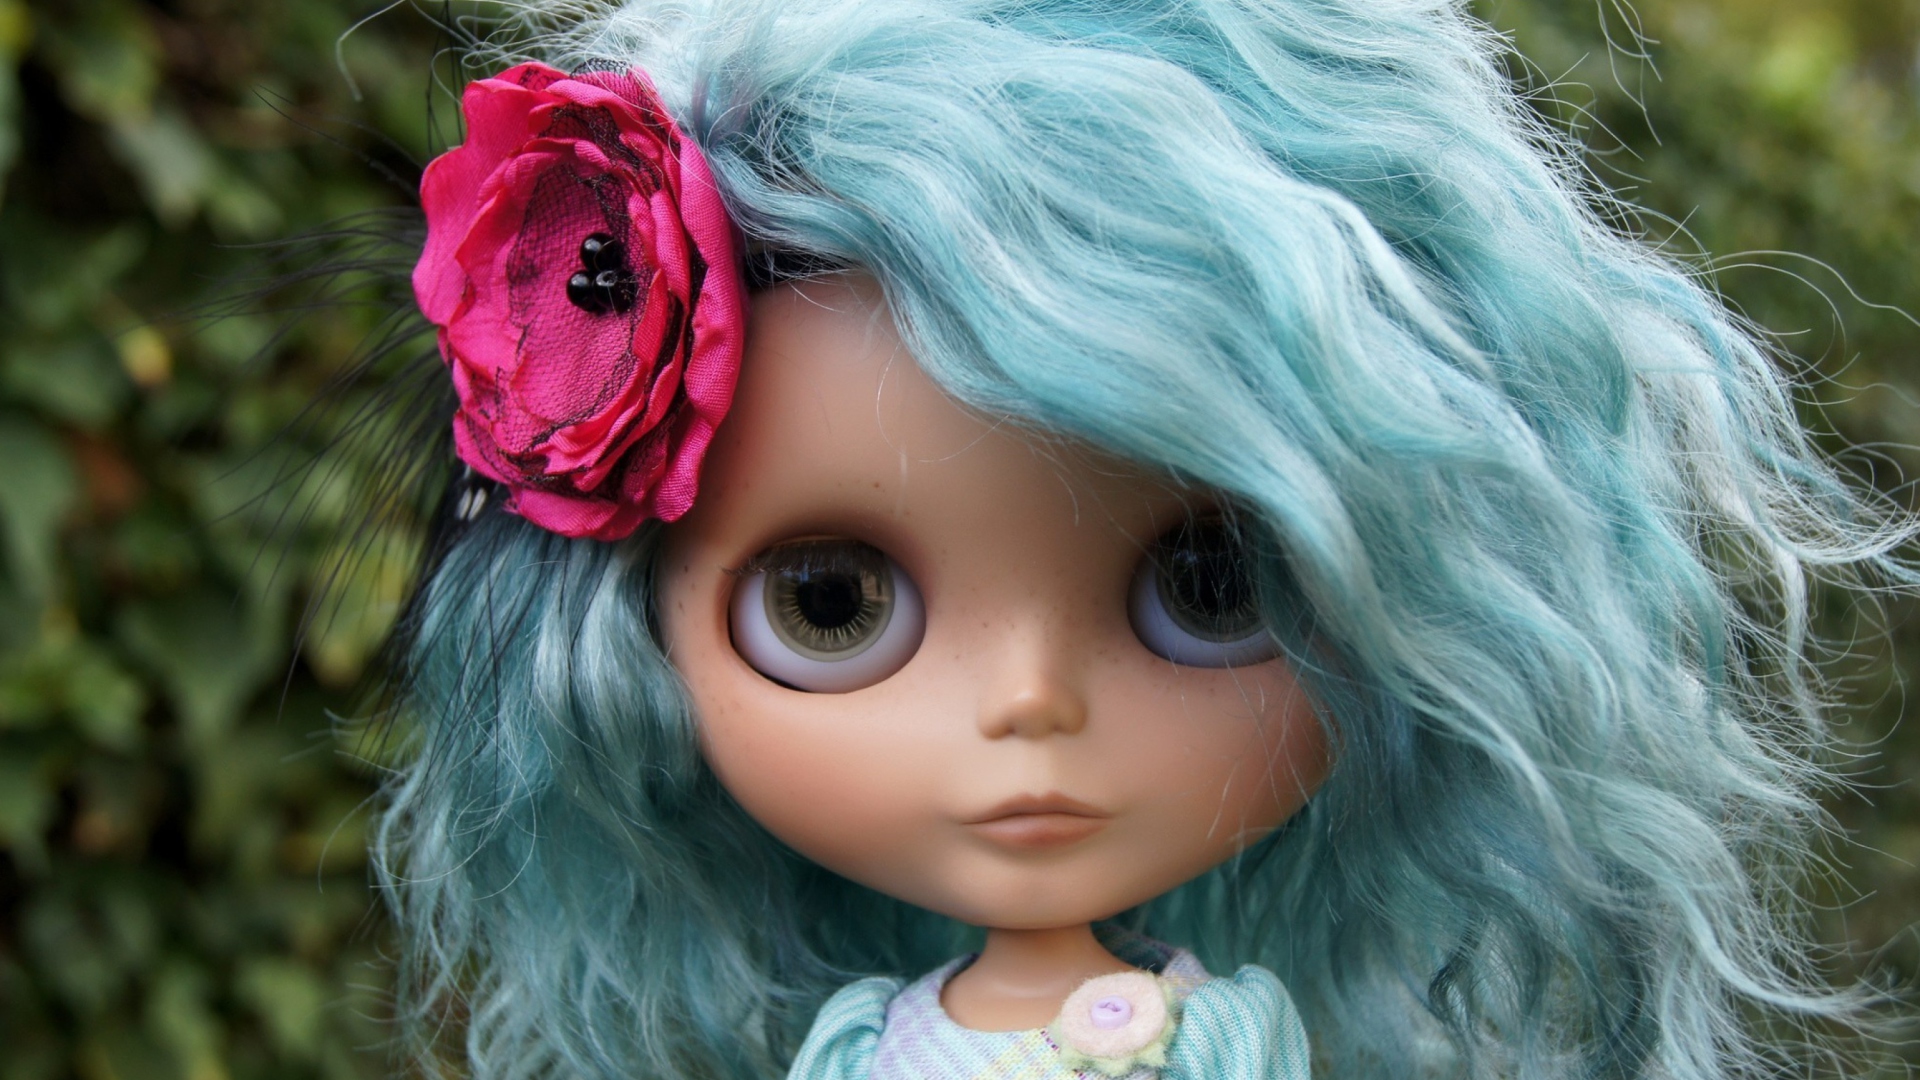 Doll With Blue Hair wallpaper 1920x1080